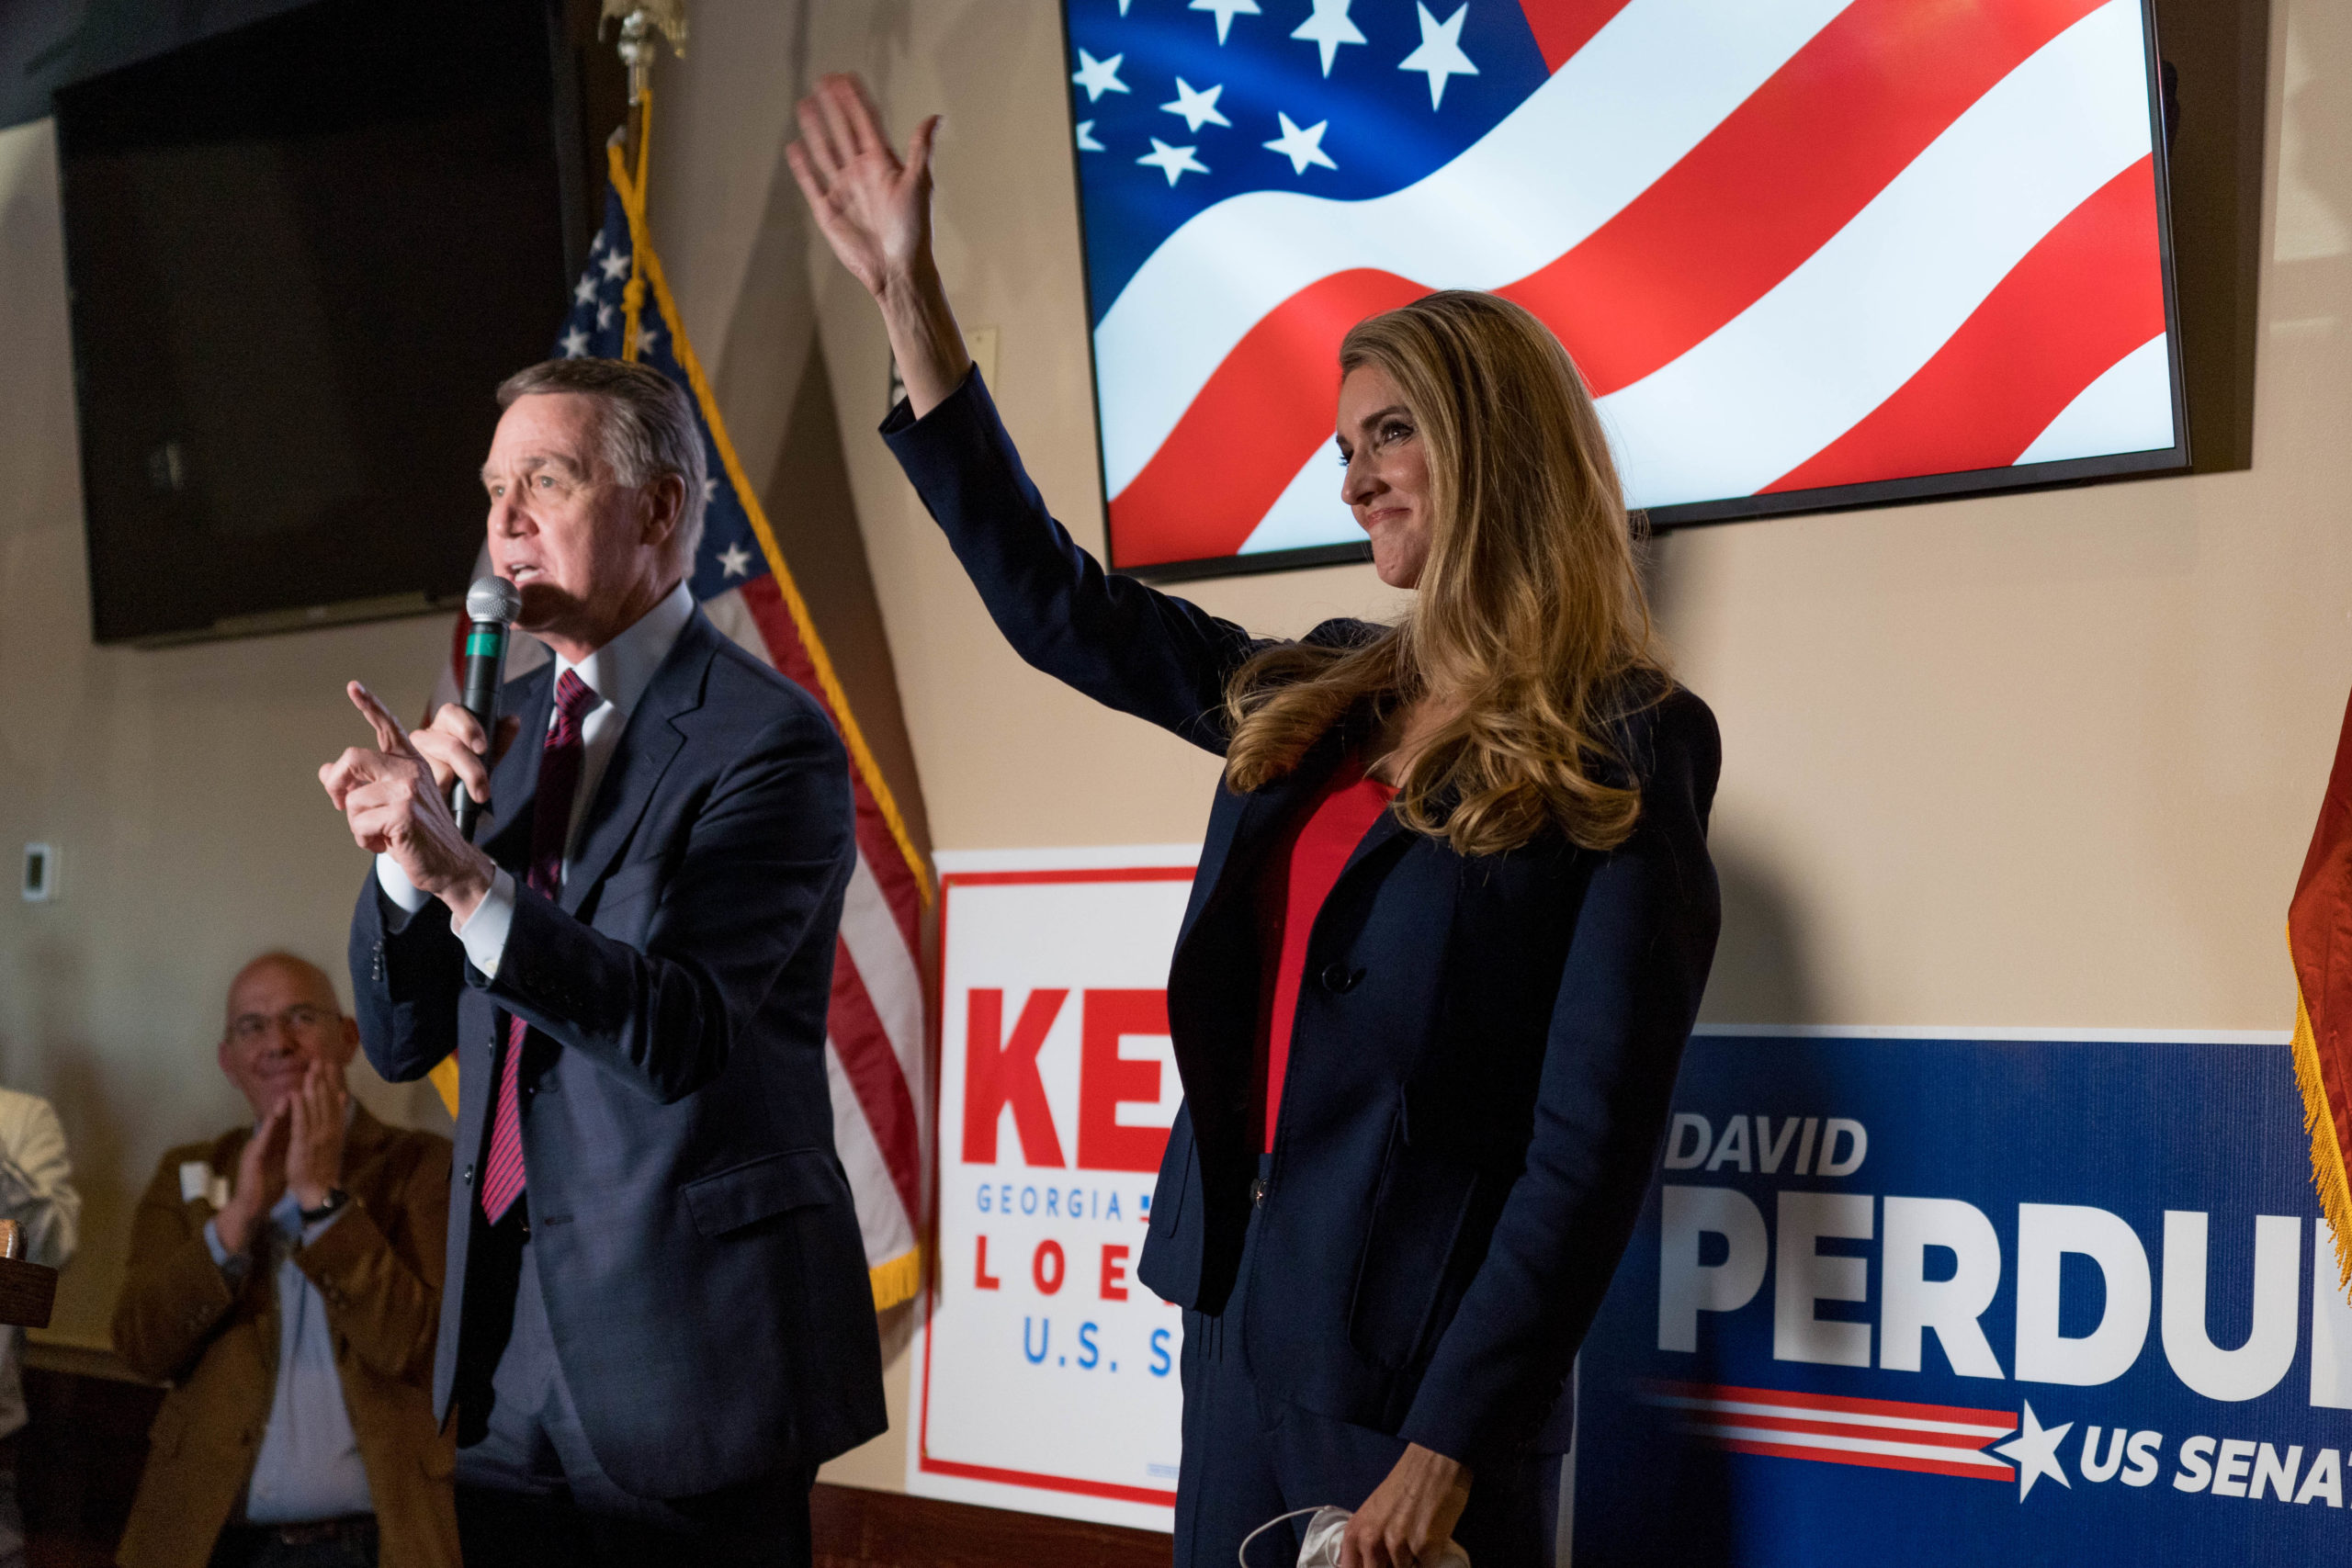 Sens. David Perdue and Kelly Loeffler speak at a campaign event to supporters at a restaurant on Nov. 13 in Cumming, Georgia. (Megan Varner/Getty Images)